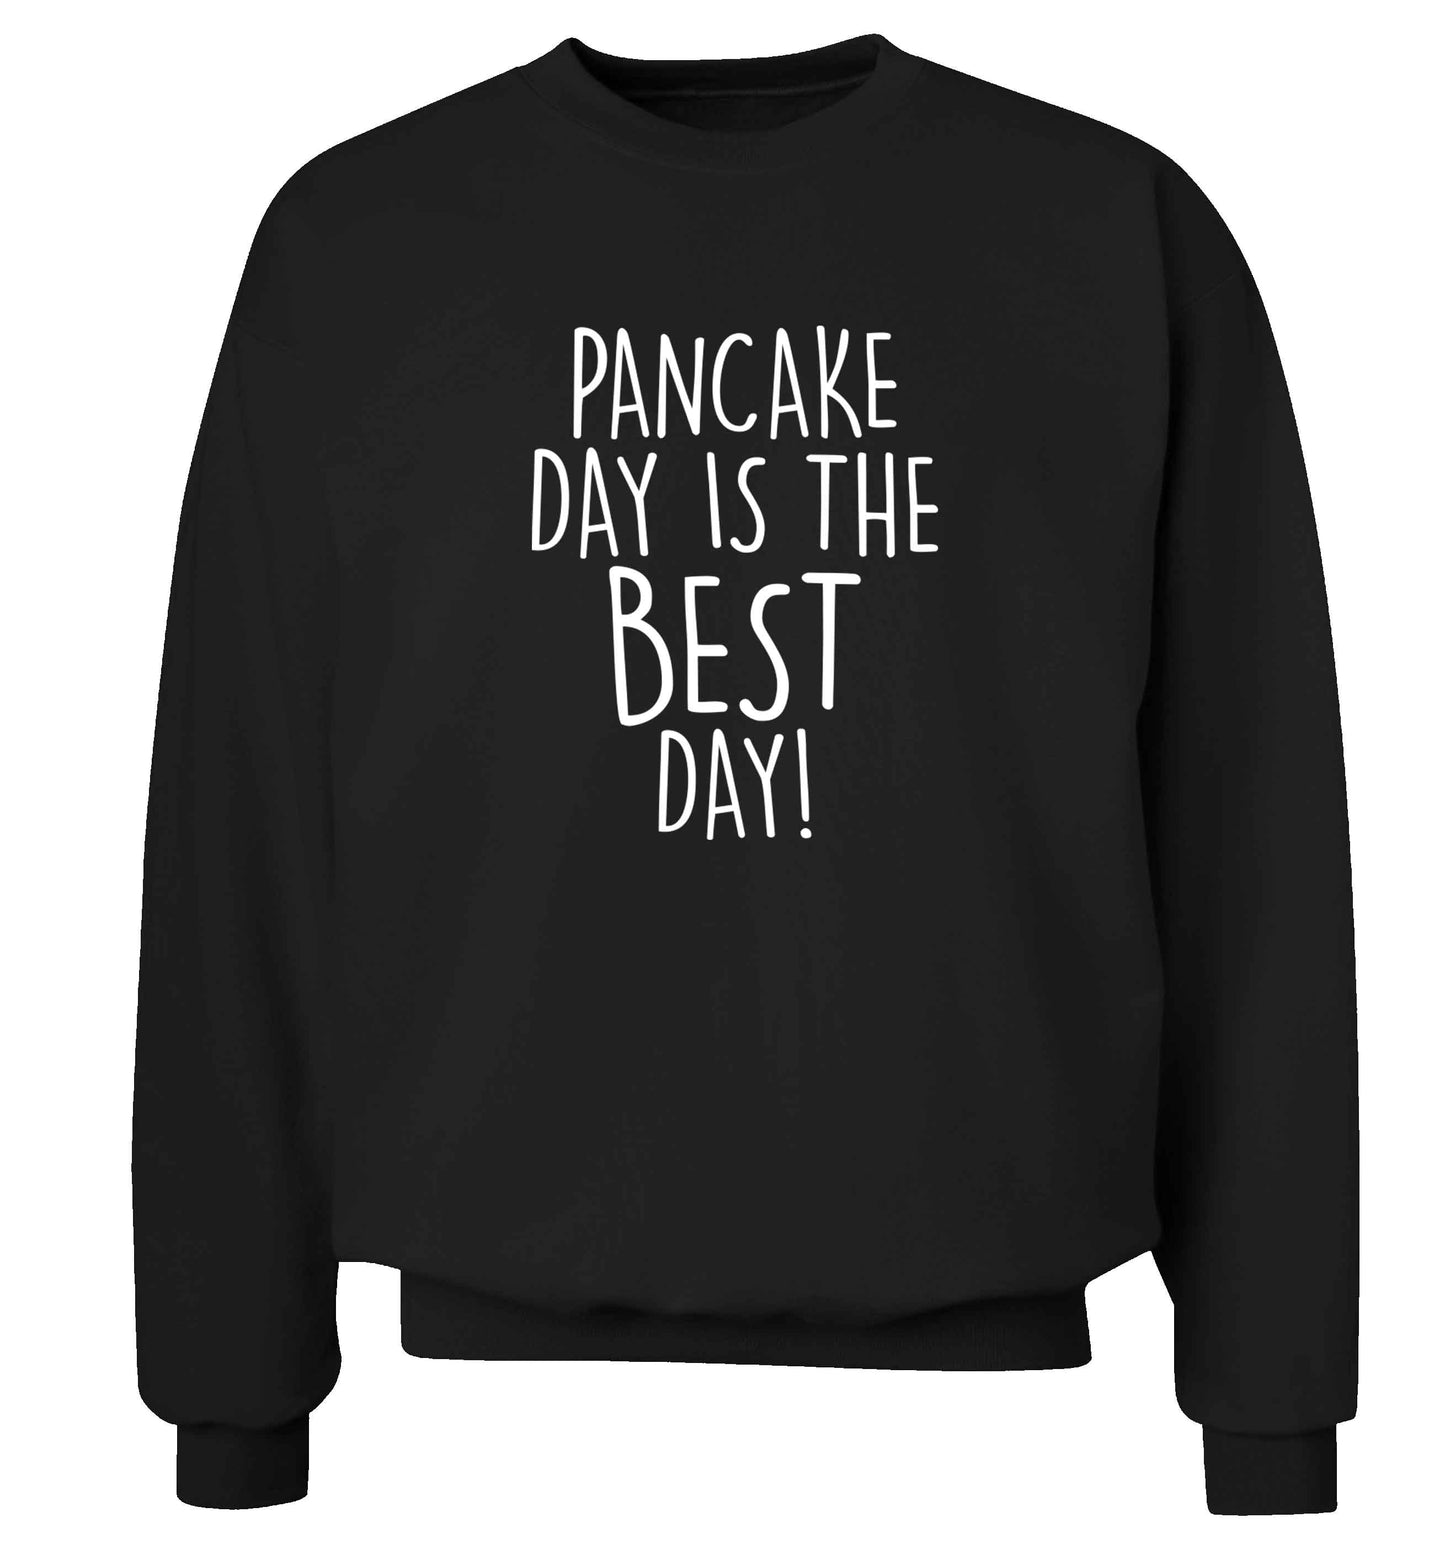 Pancake day is the best day adult's unisex black sweater 2XL